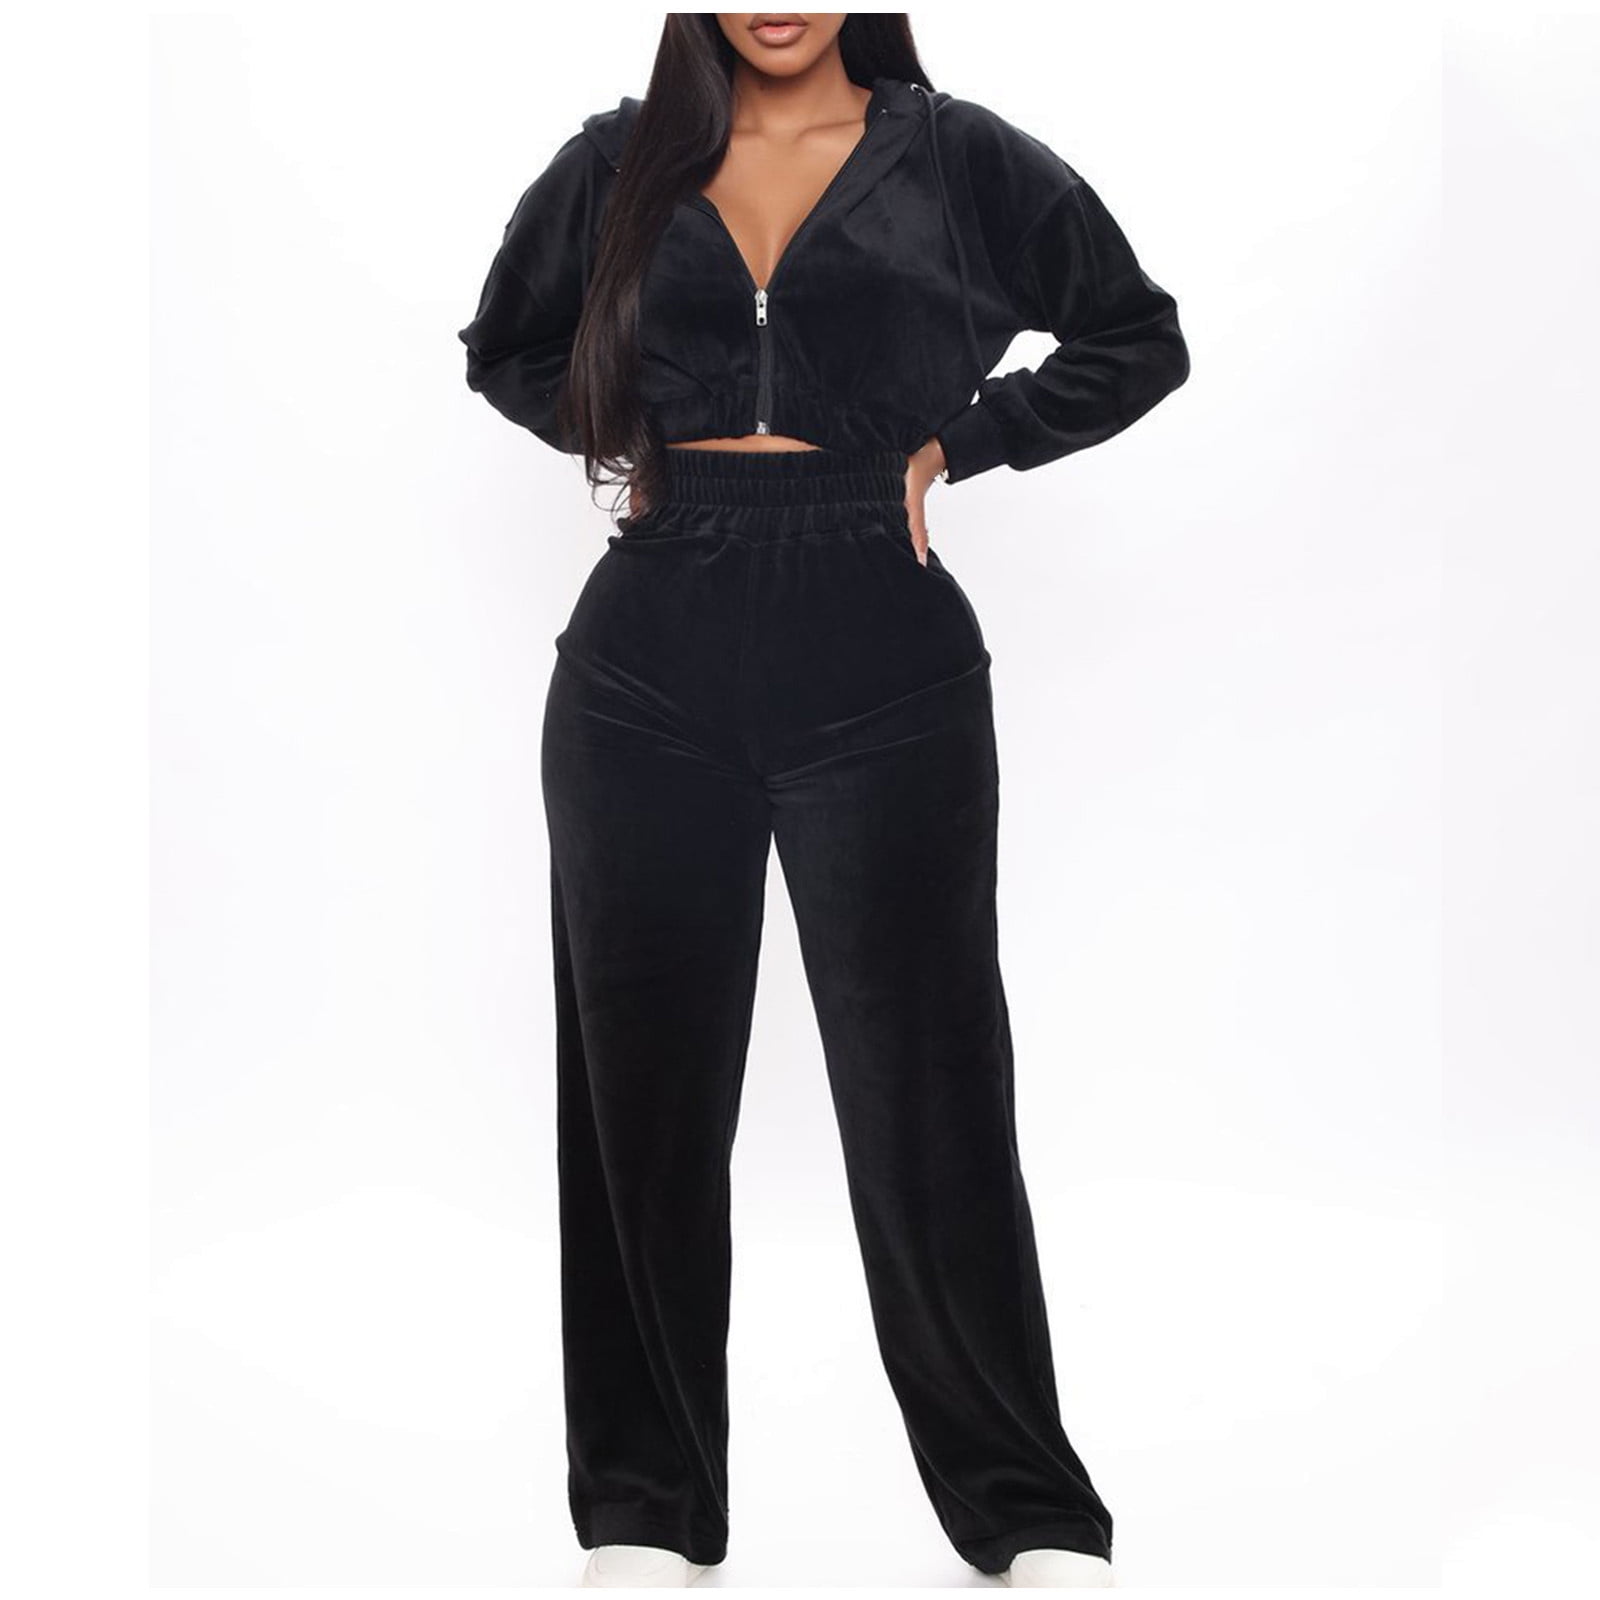 Bairmild Womens Two Pieces Outfit Tracksuit Long Sleeve Crop Top